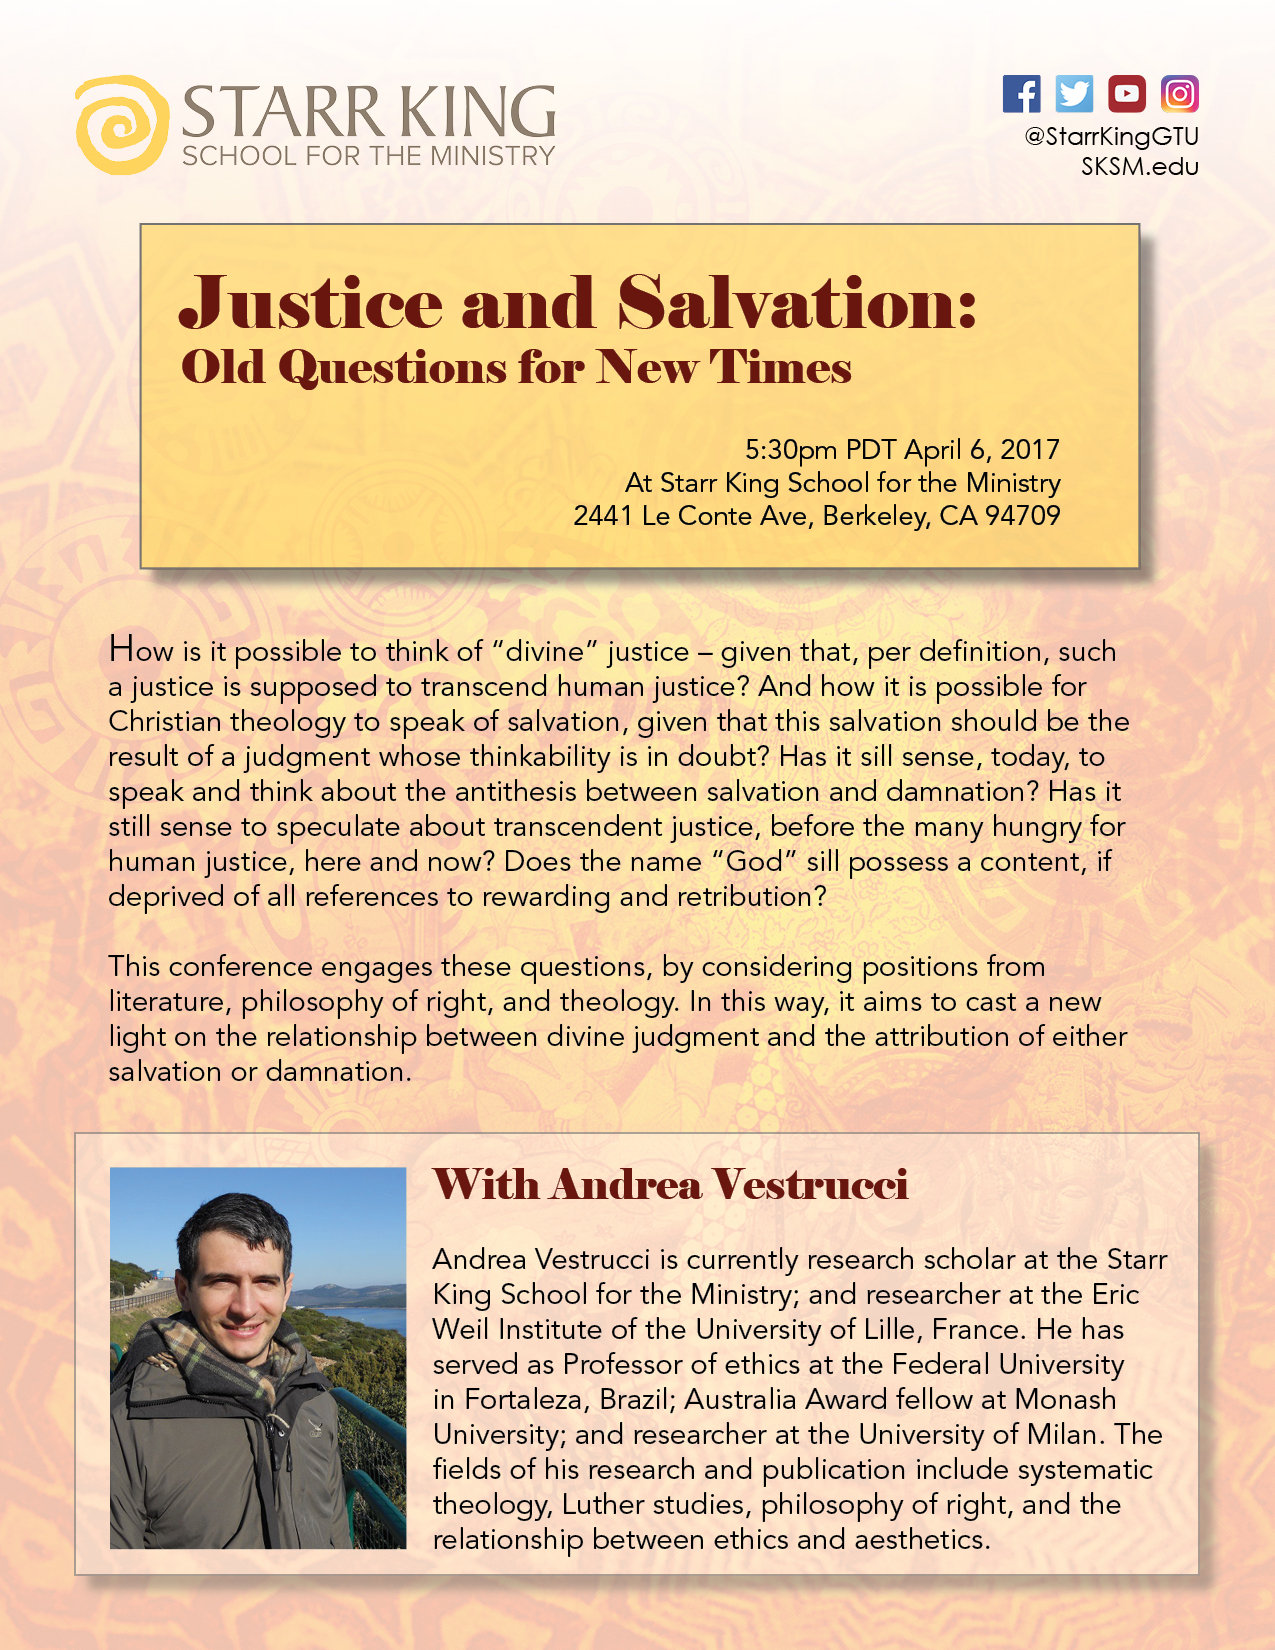 Justice and Salvation Flyer